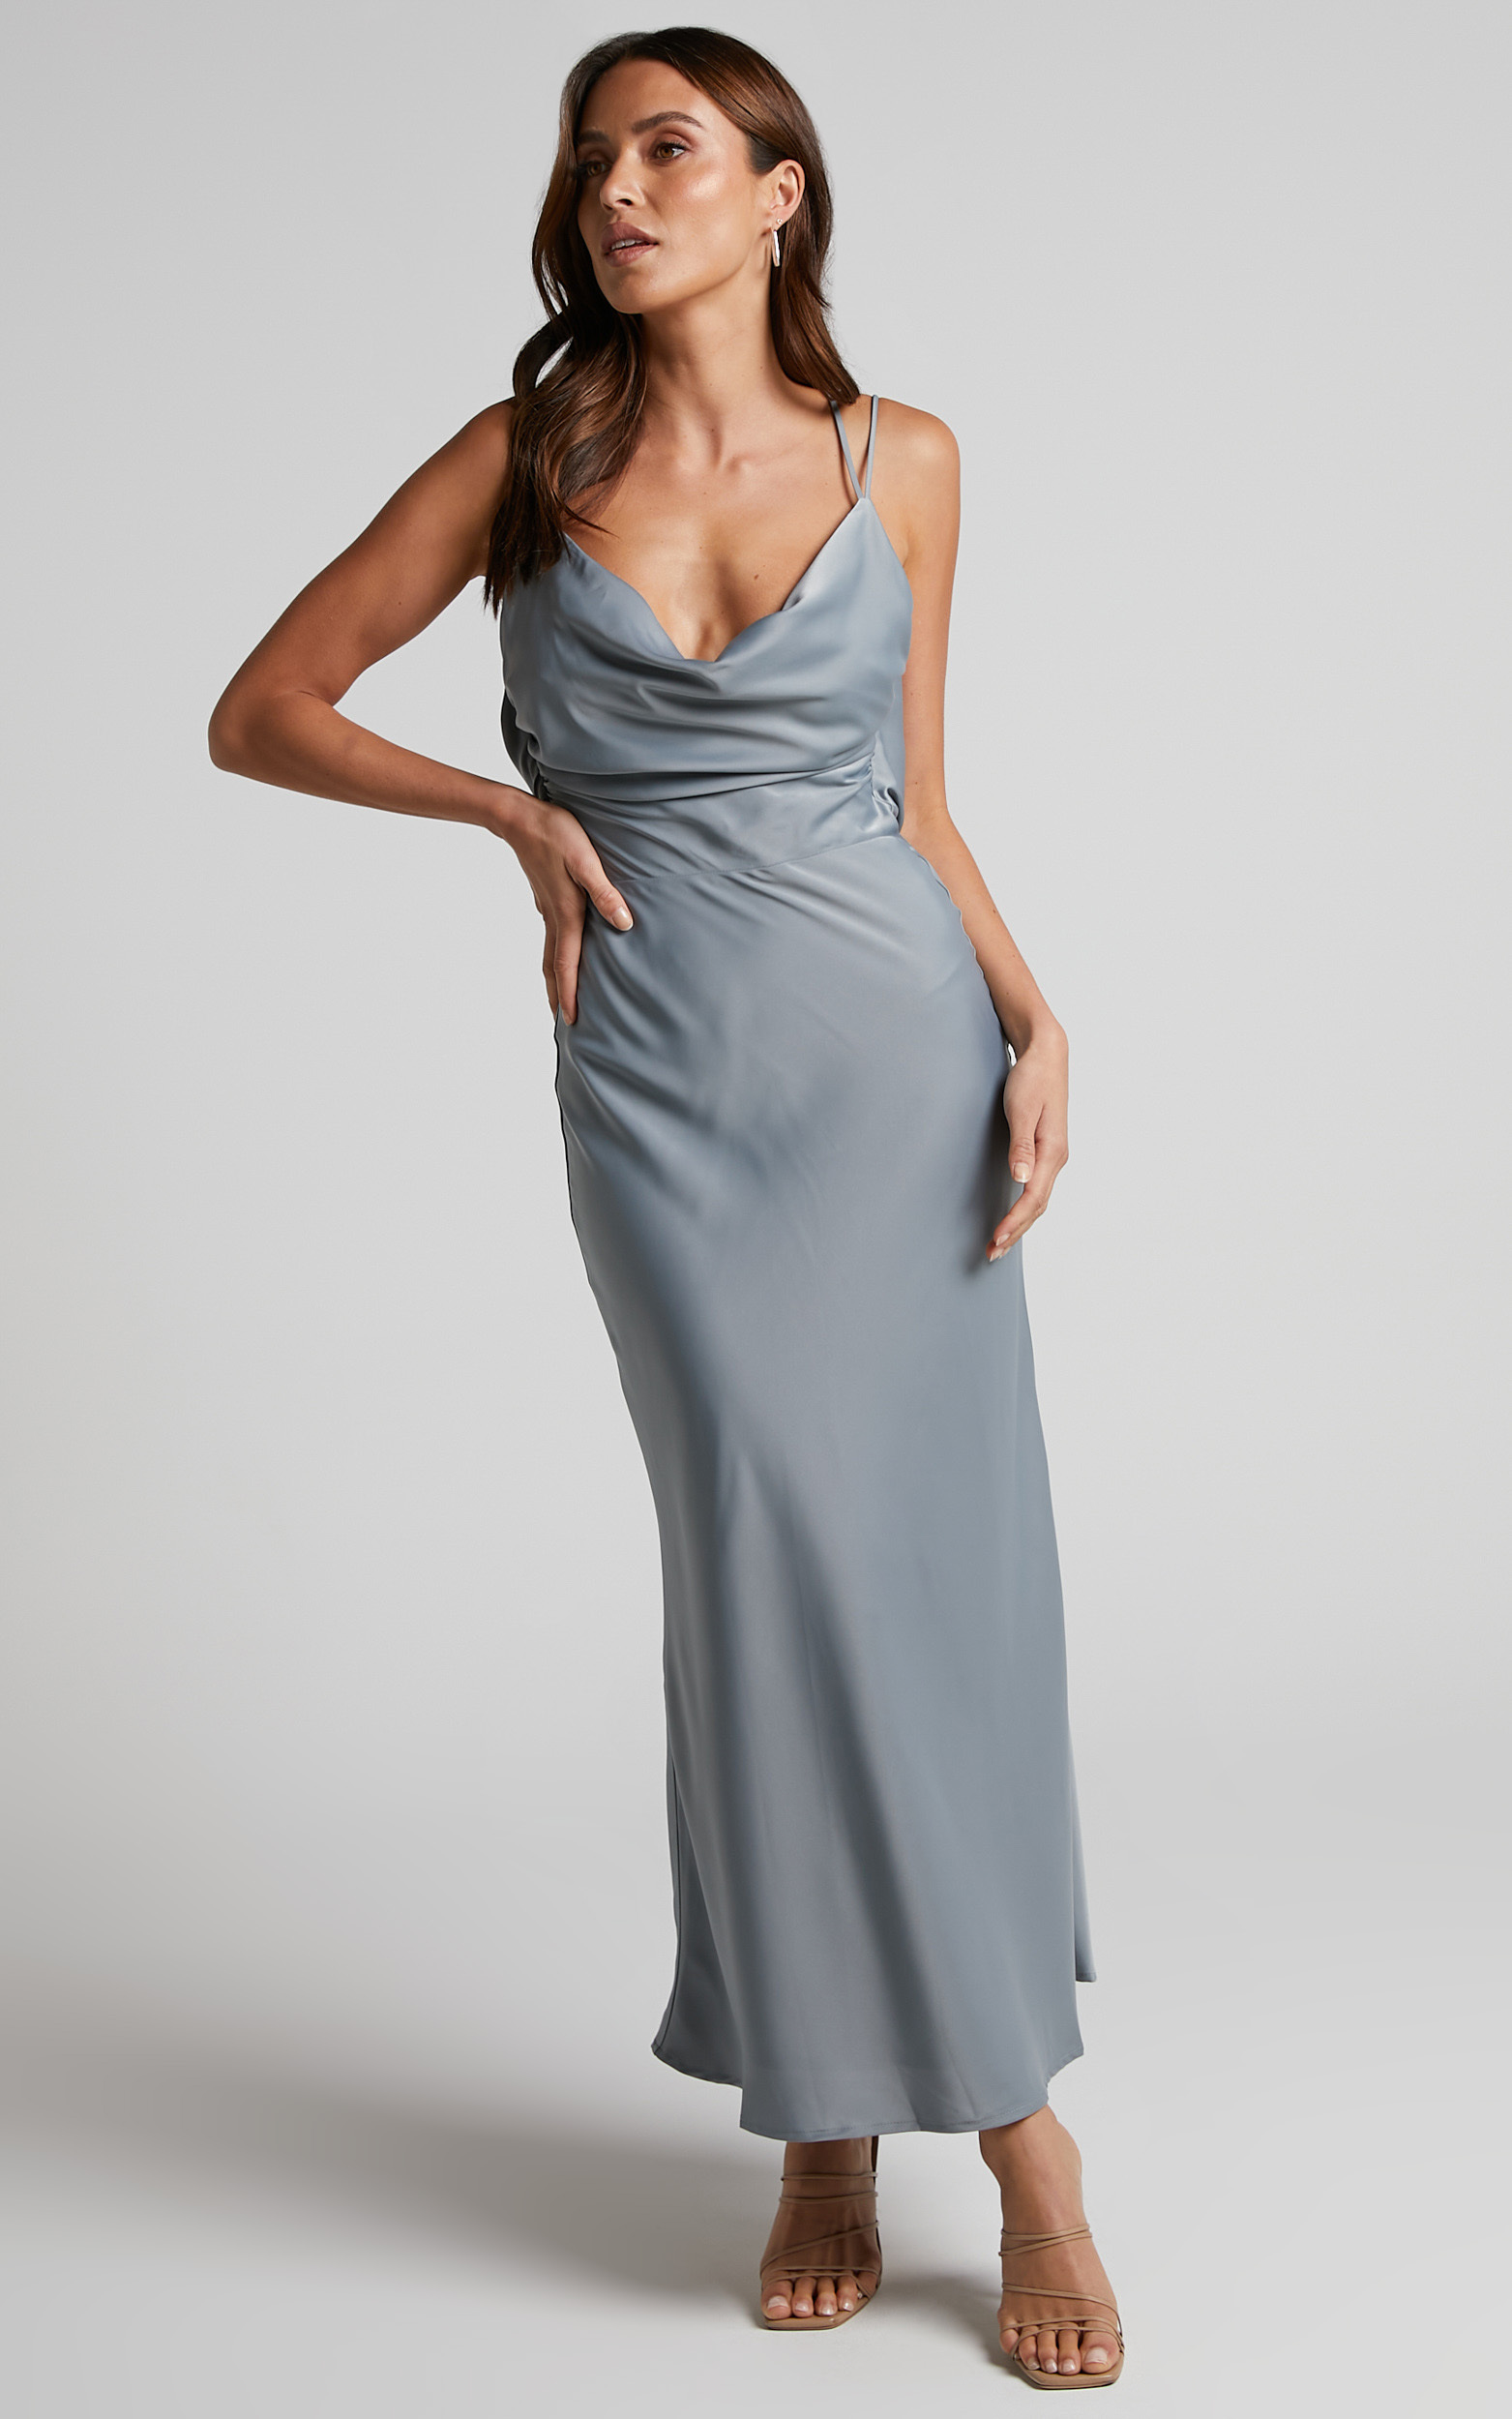 Soft Petal Cowl Crossover Back Midi Dress in Pewter - 04, GRY1, hi-res image number null